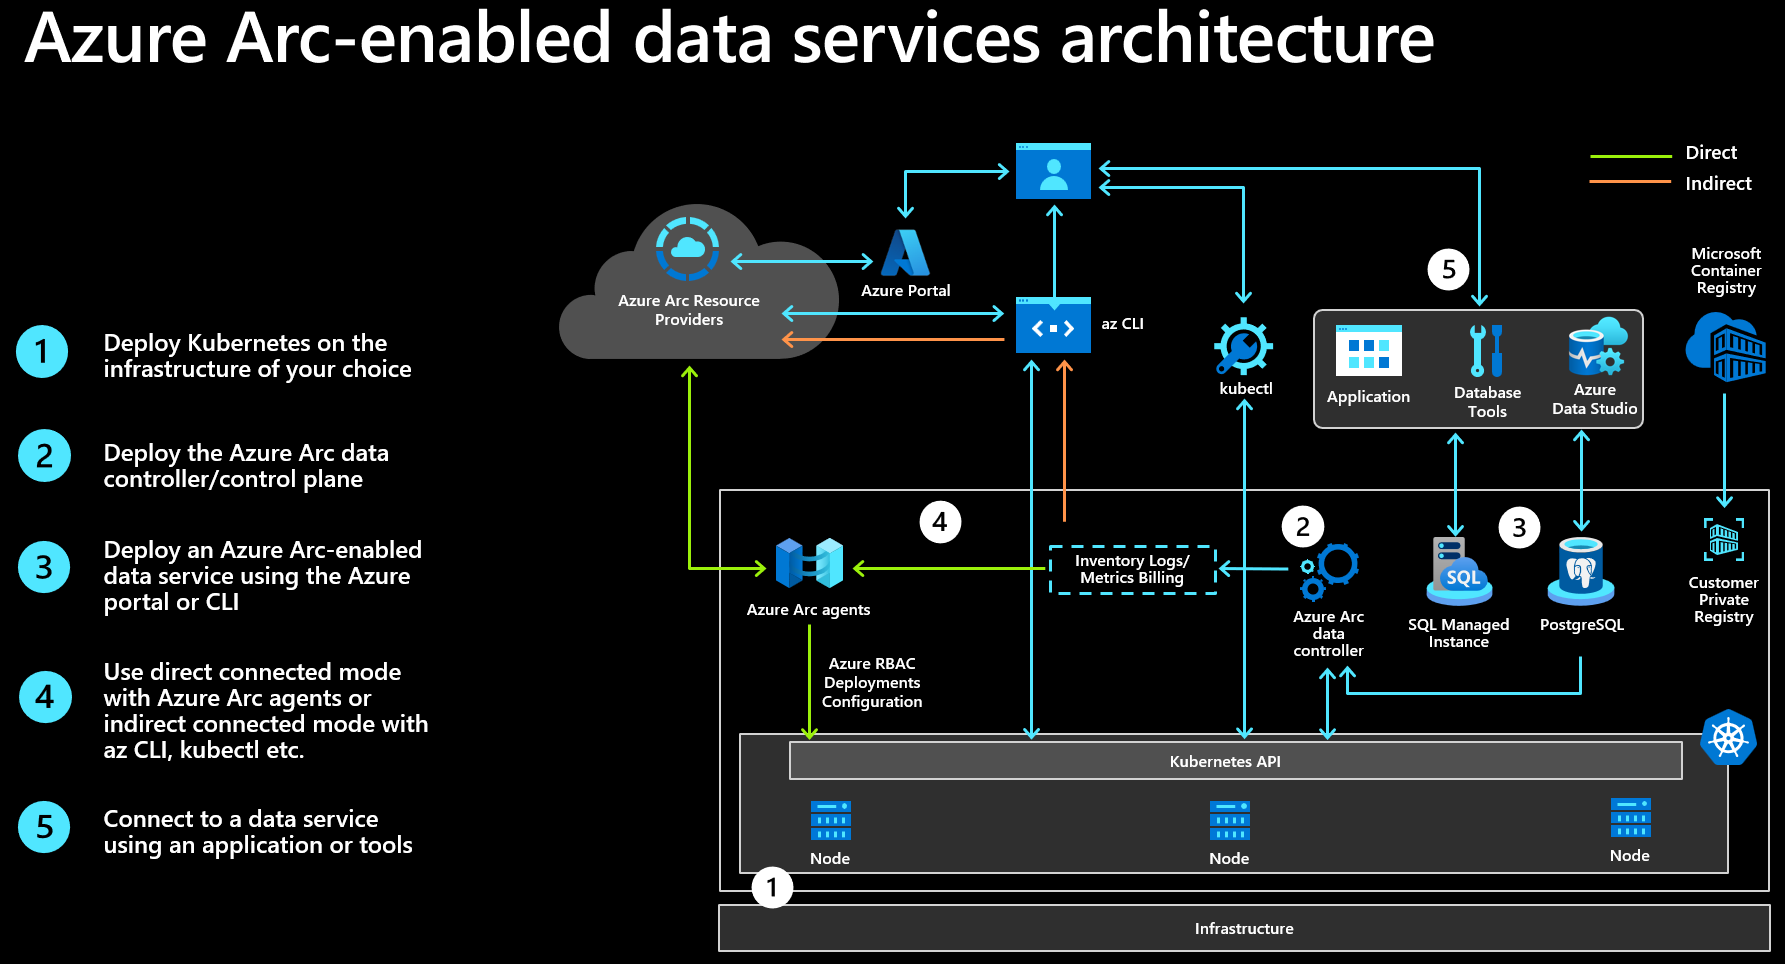 Diagram of Azure Arc-enabled data services architecture and their provisioning process.